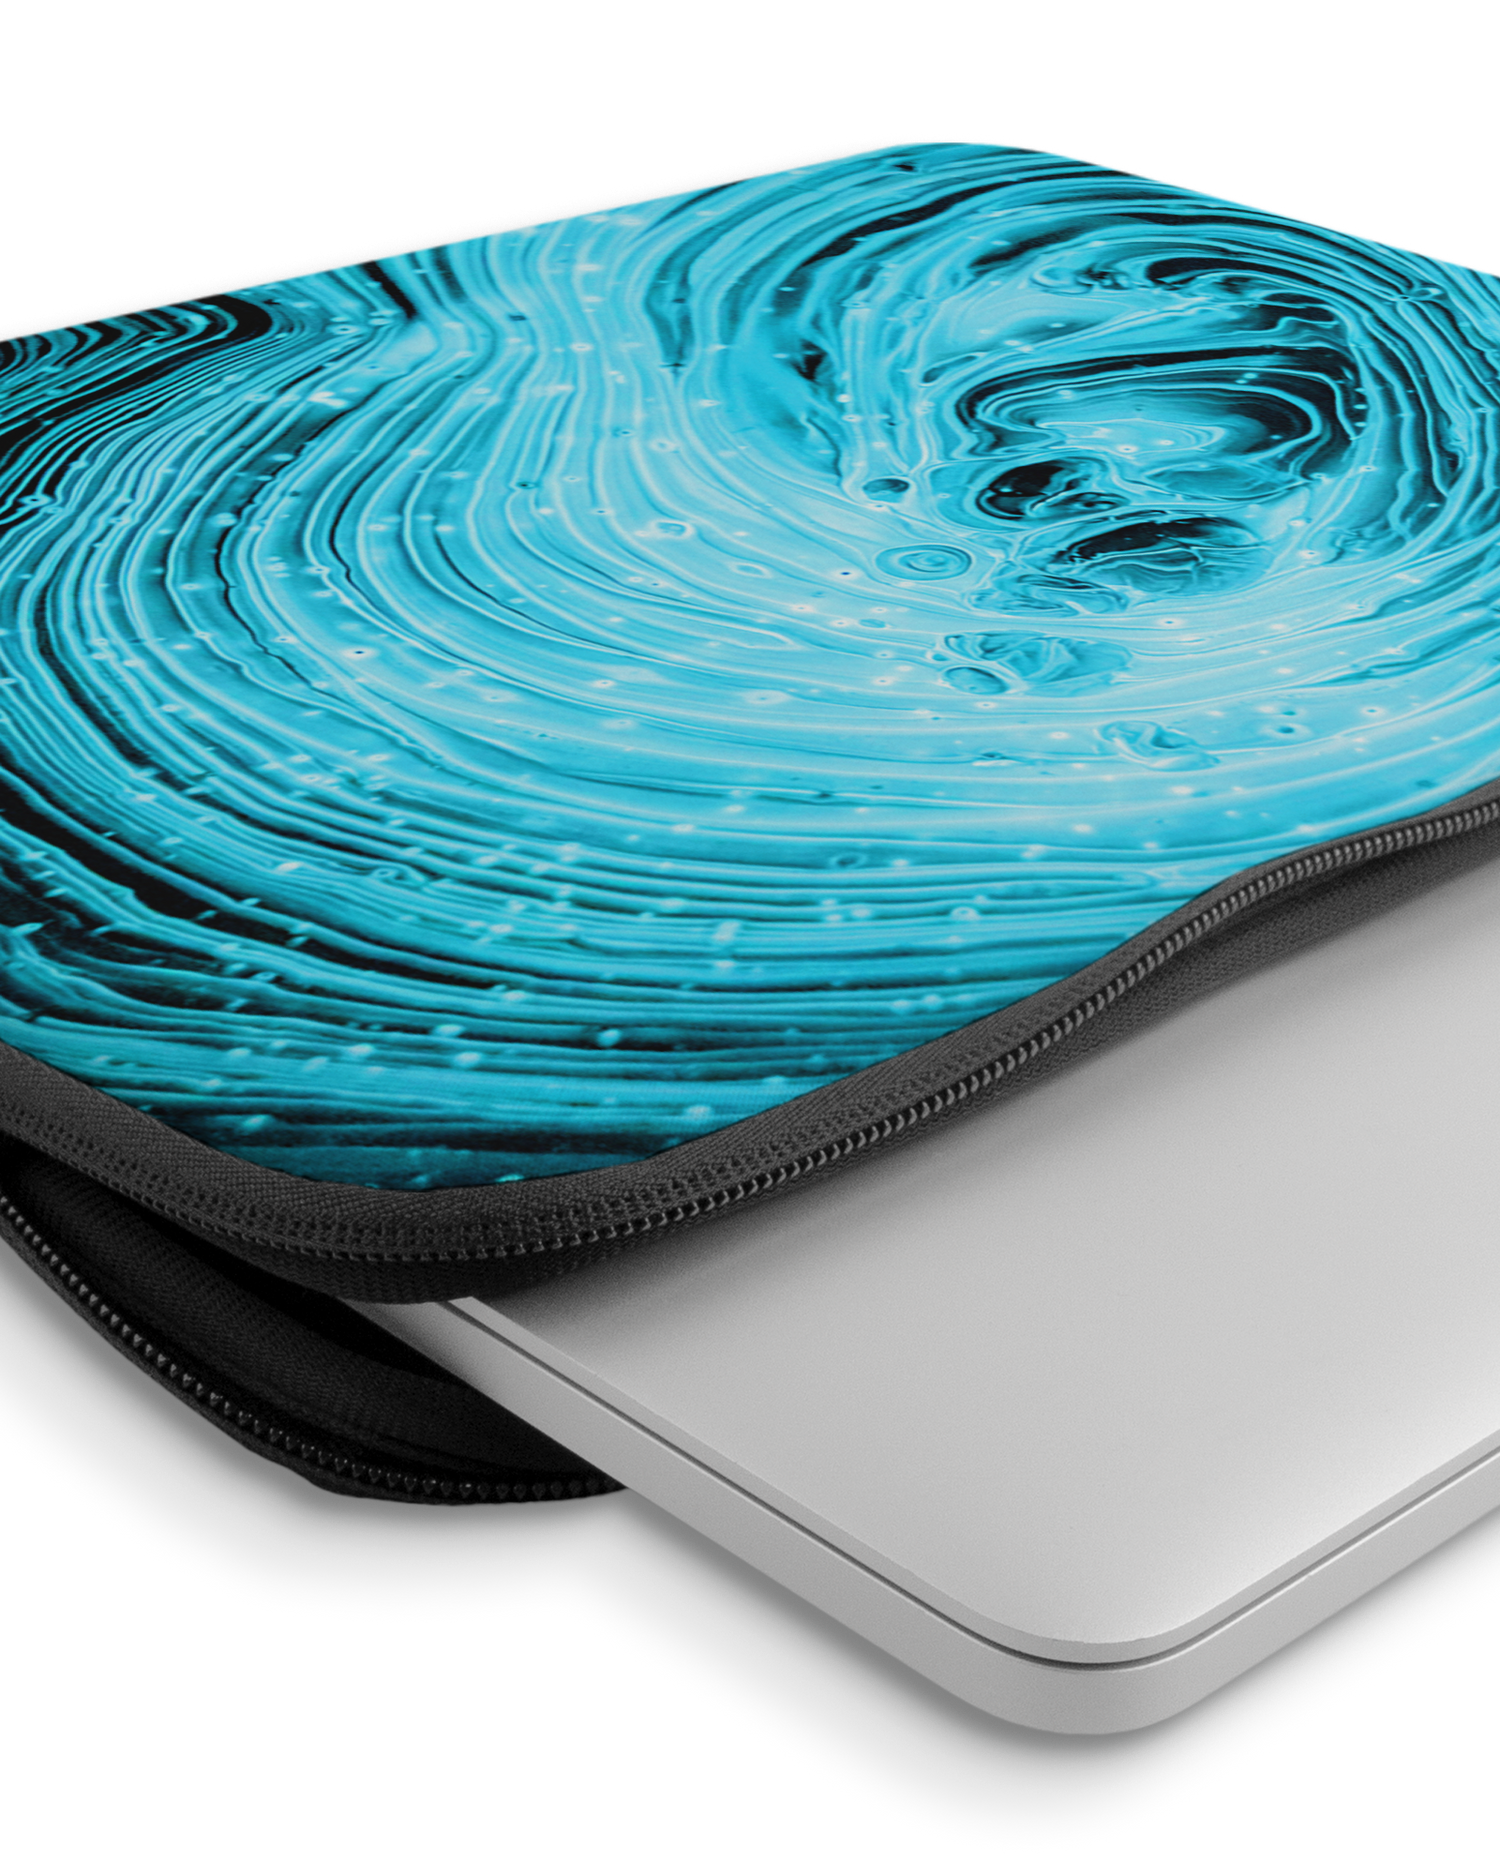 Turquoise Ripples Laptop Case 14-15 inch with device inside